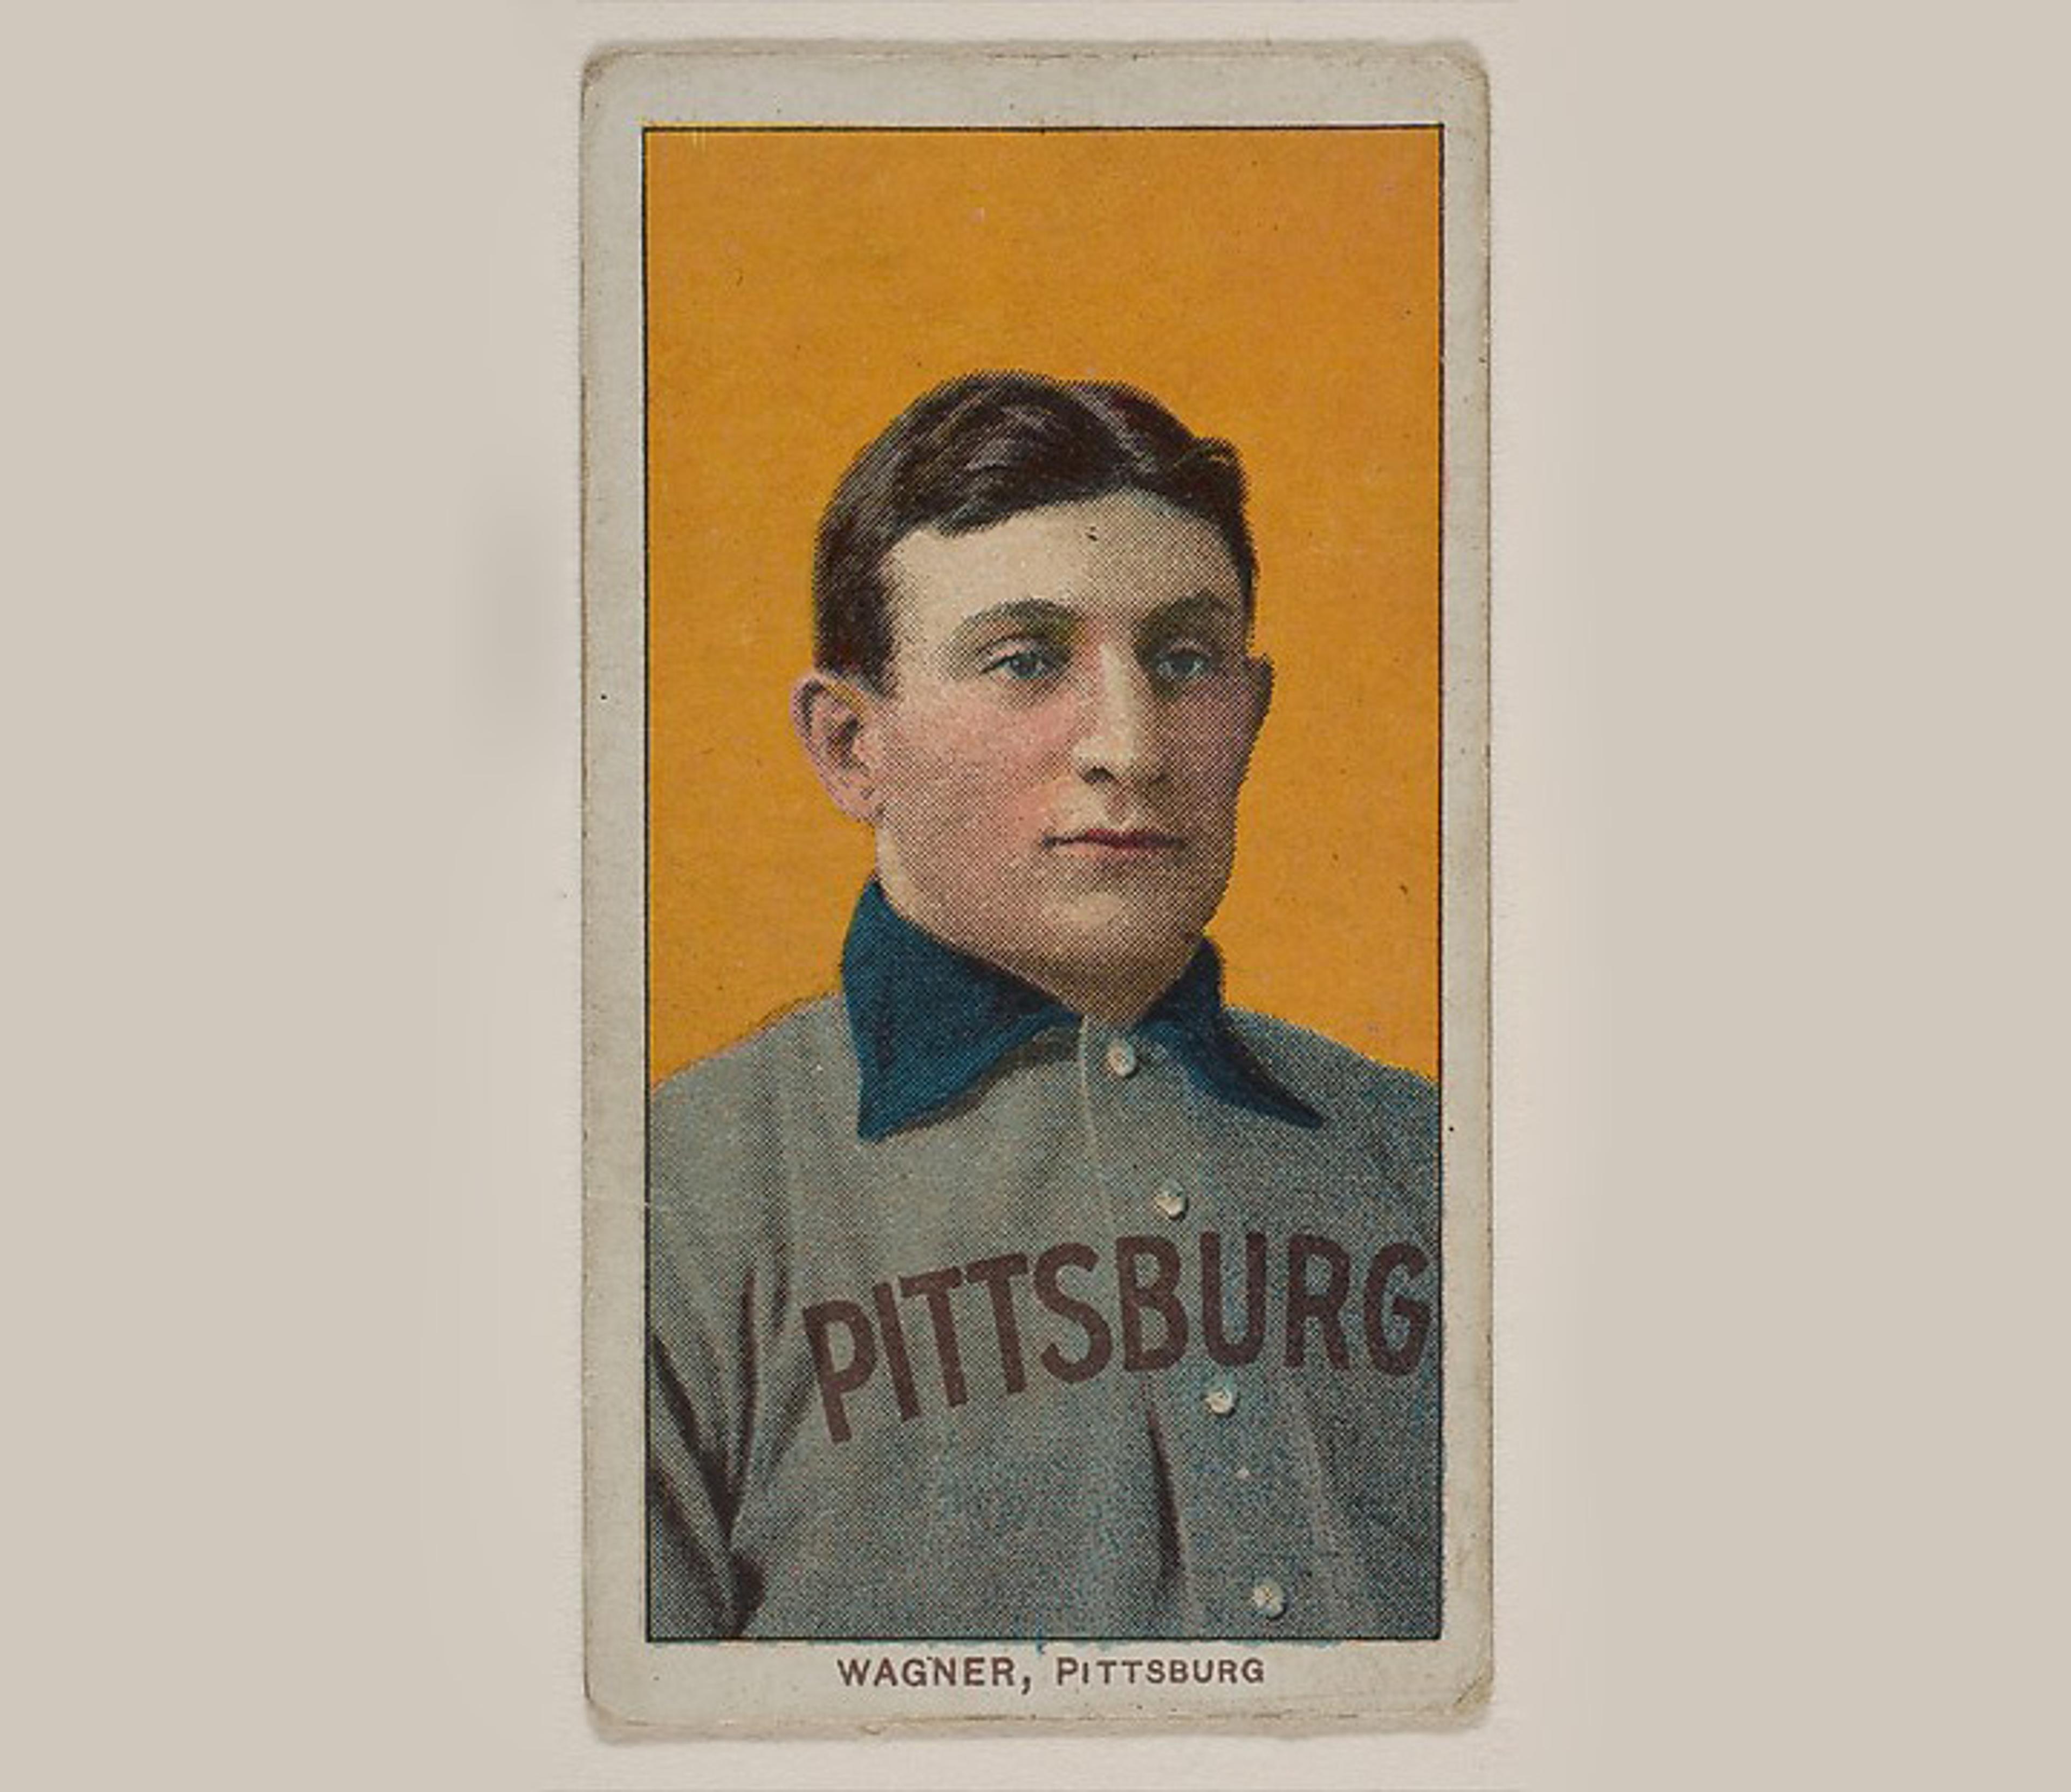 Honus Wagner, Pittsburgh, National League, from the White Border series (T206) for the American Tobacco Company